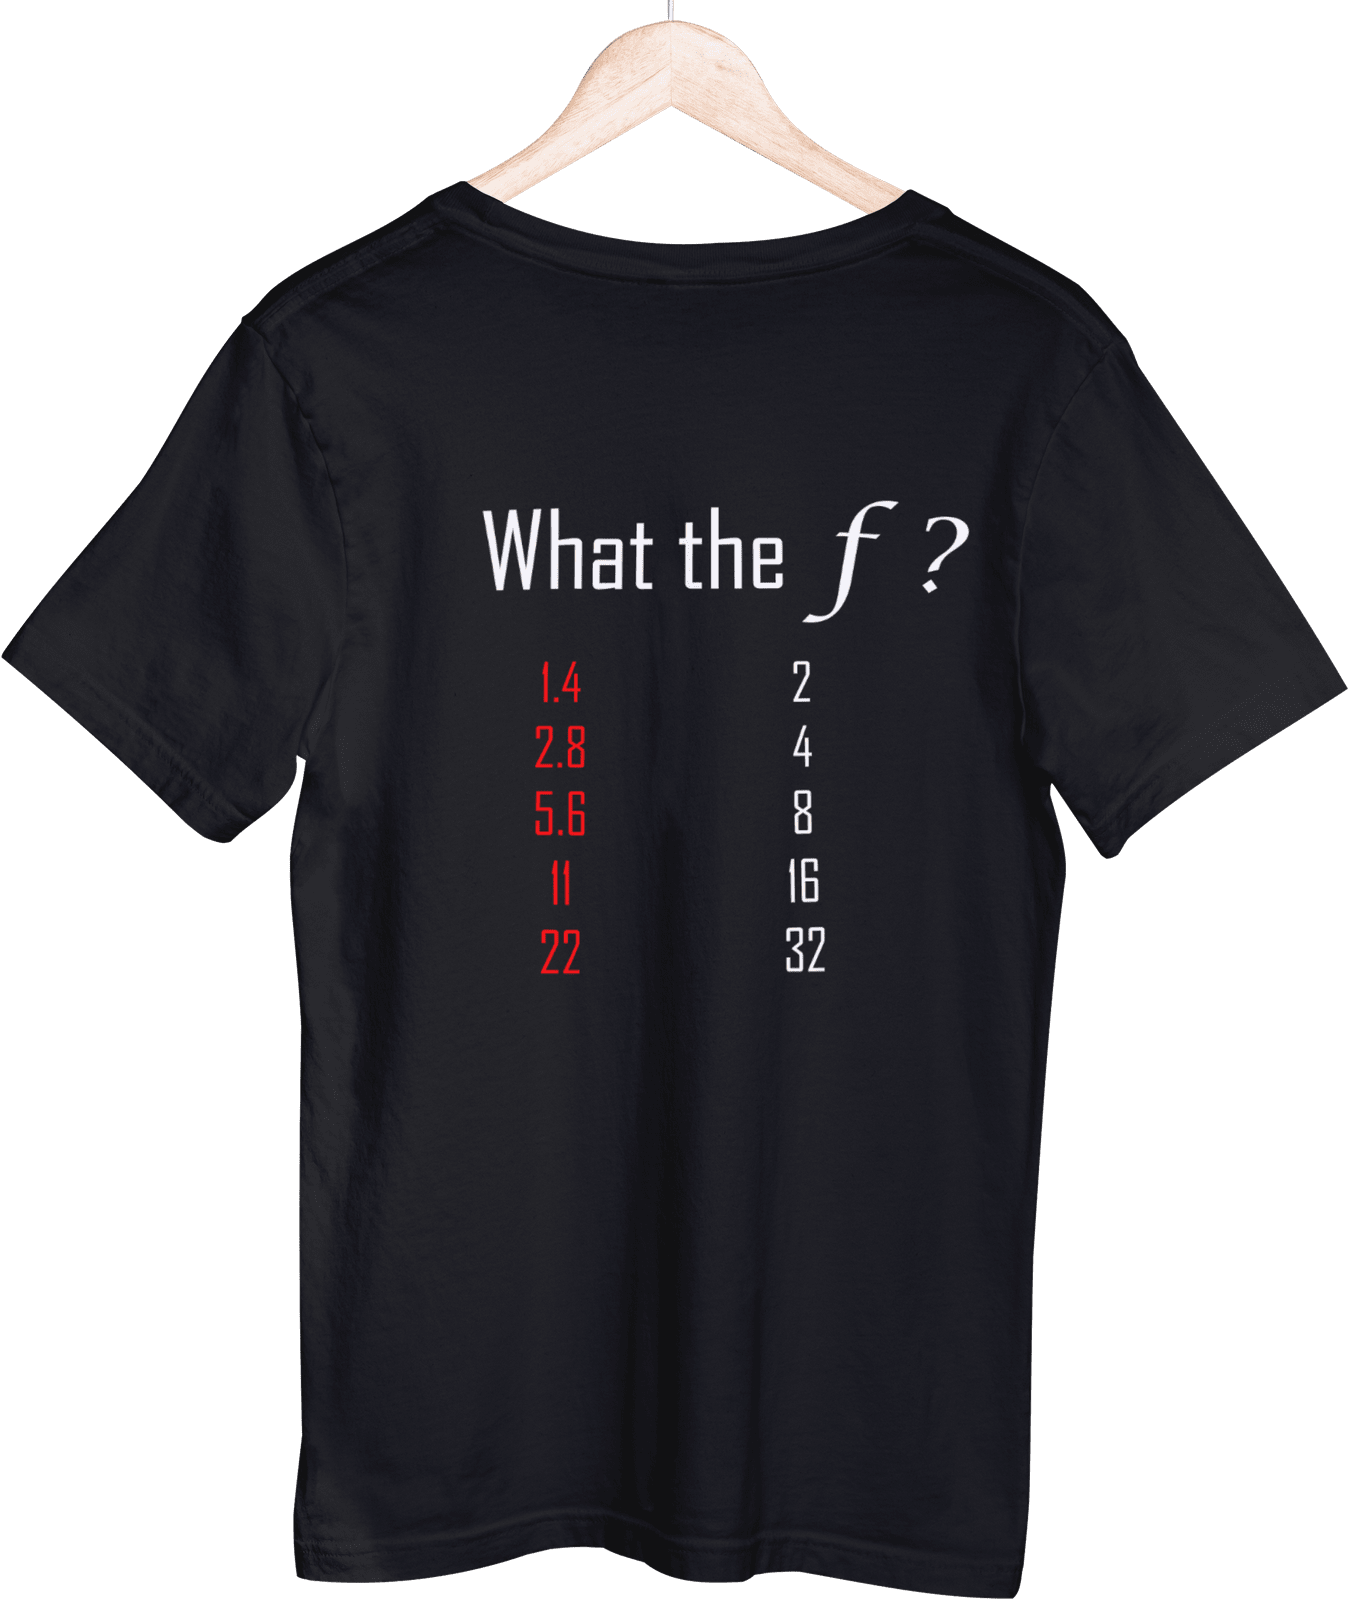 What the f (Unisex T-Shirt)